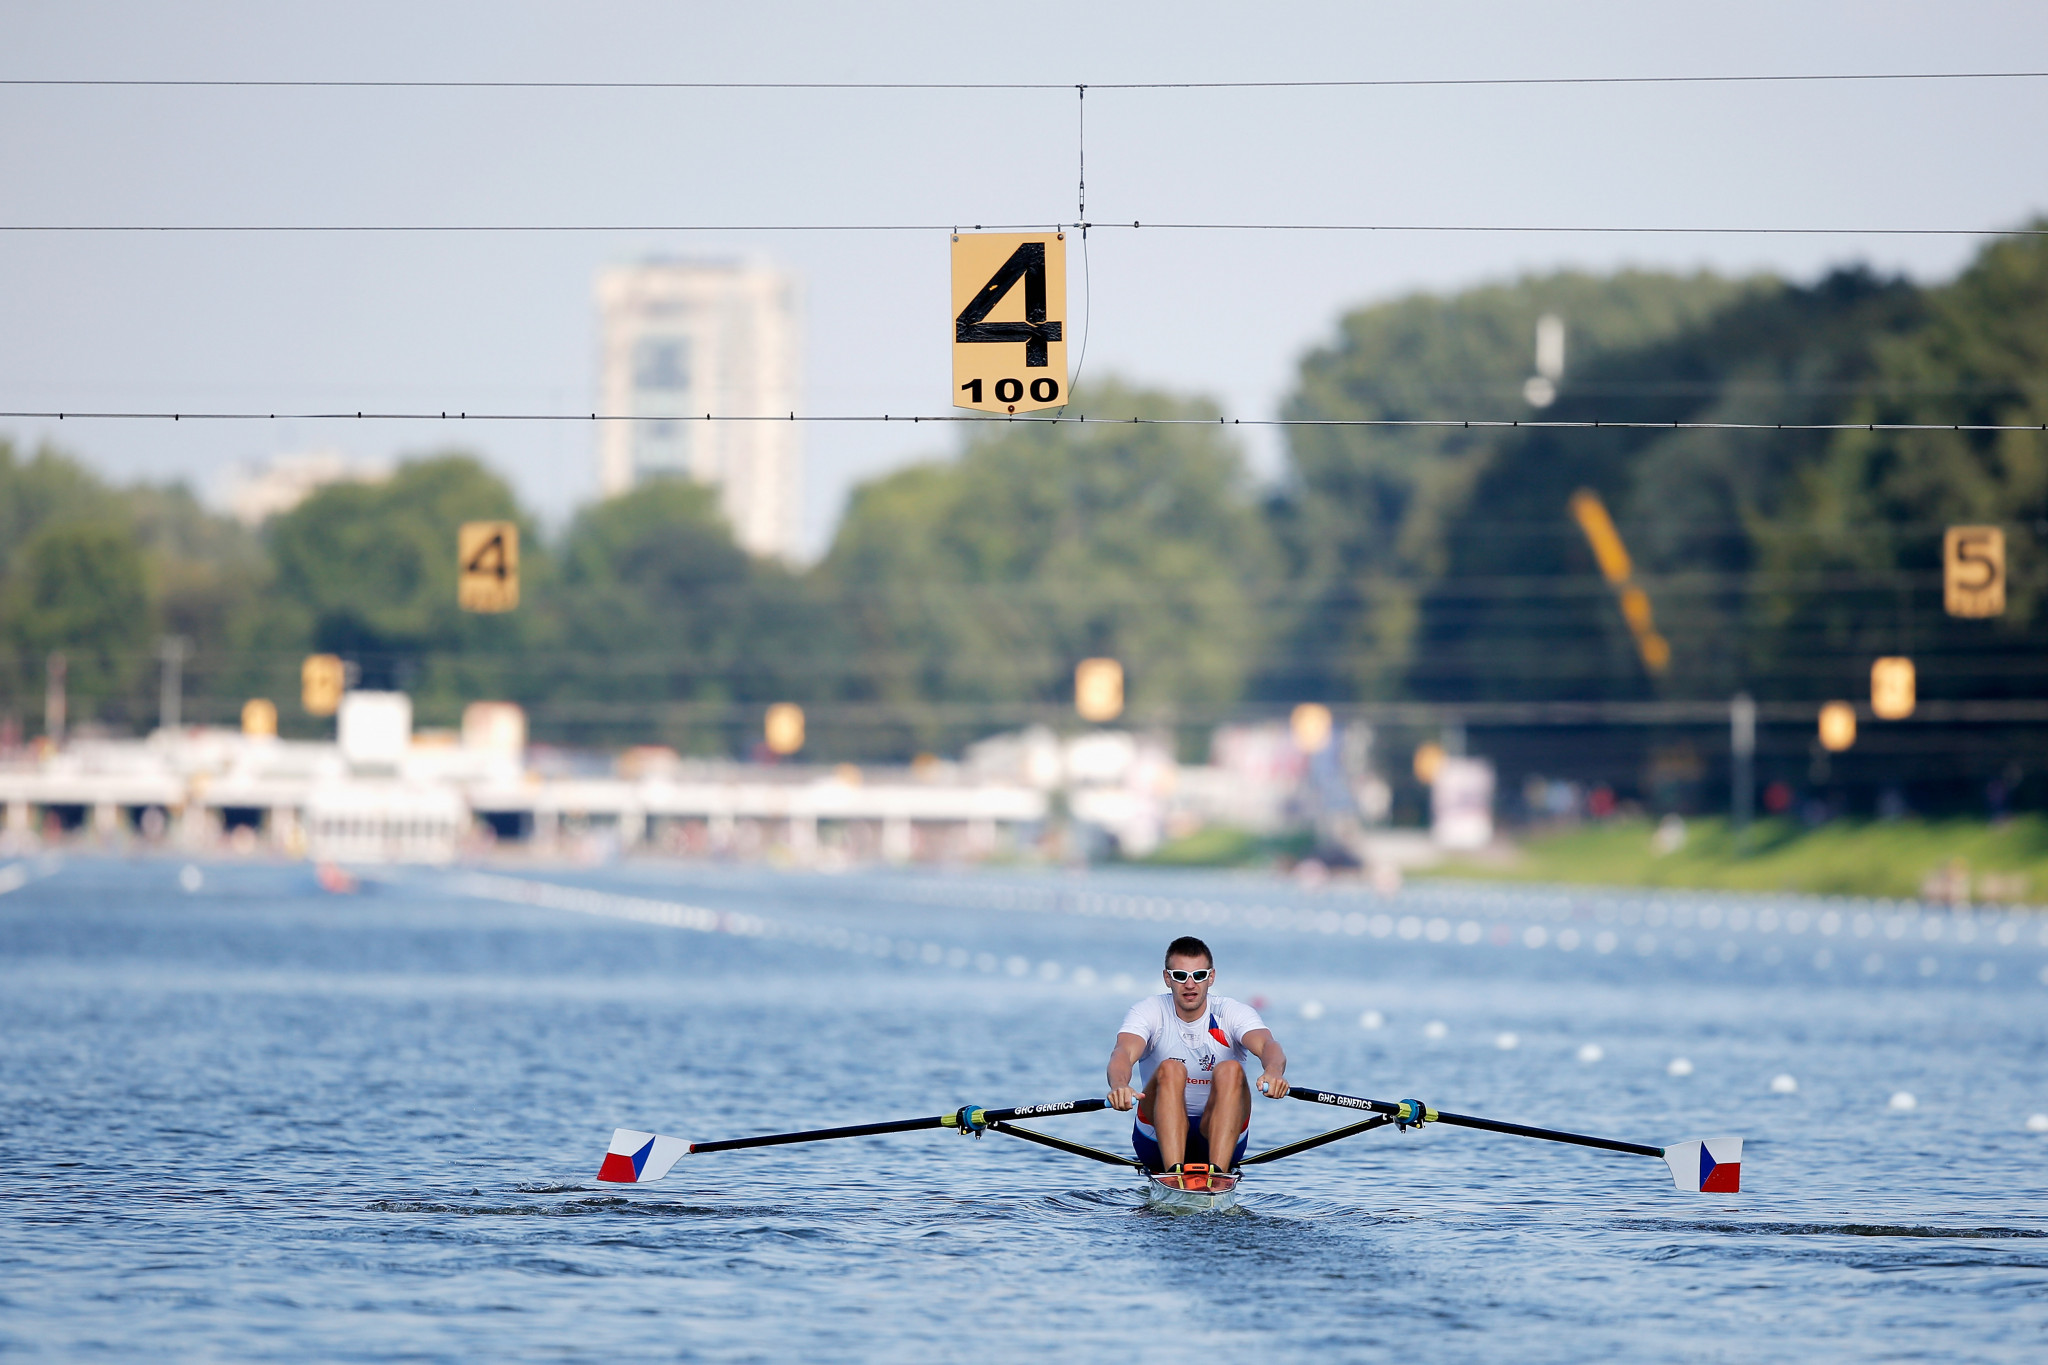 Amsterdam previously held the World Rowing Championships in 1977 and 2014 ©Getty Images